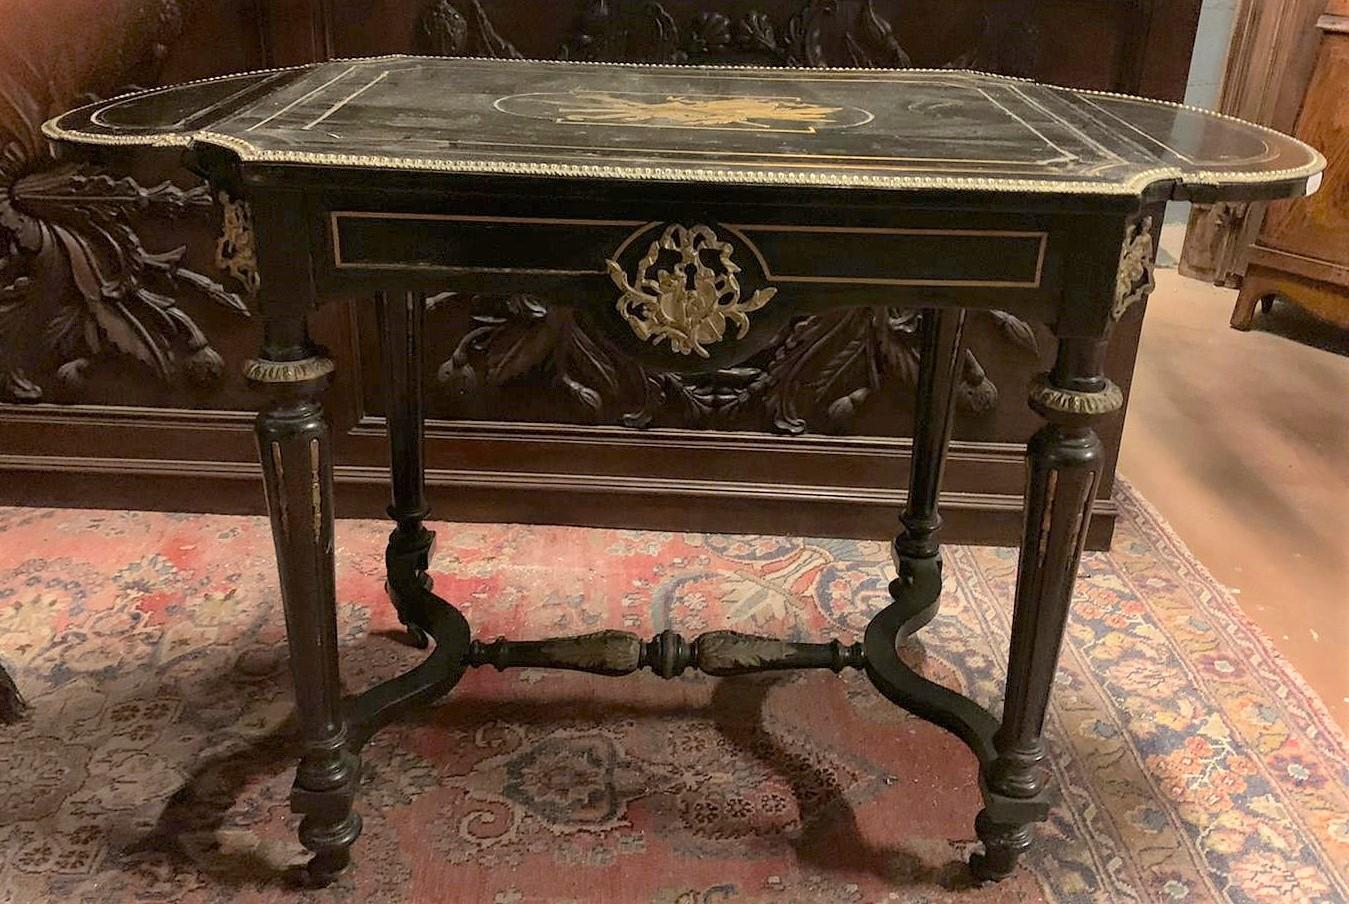 Antique writing desk in black lacquered wood, with adjustable flaps on the sides, rich ornaments in gilded brass, built according to the fashion of the late 19th century in France. The side shelves measuring 20 cm w each, can be raised if necessary,